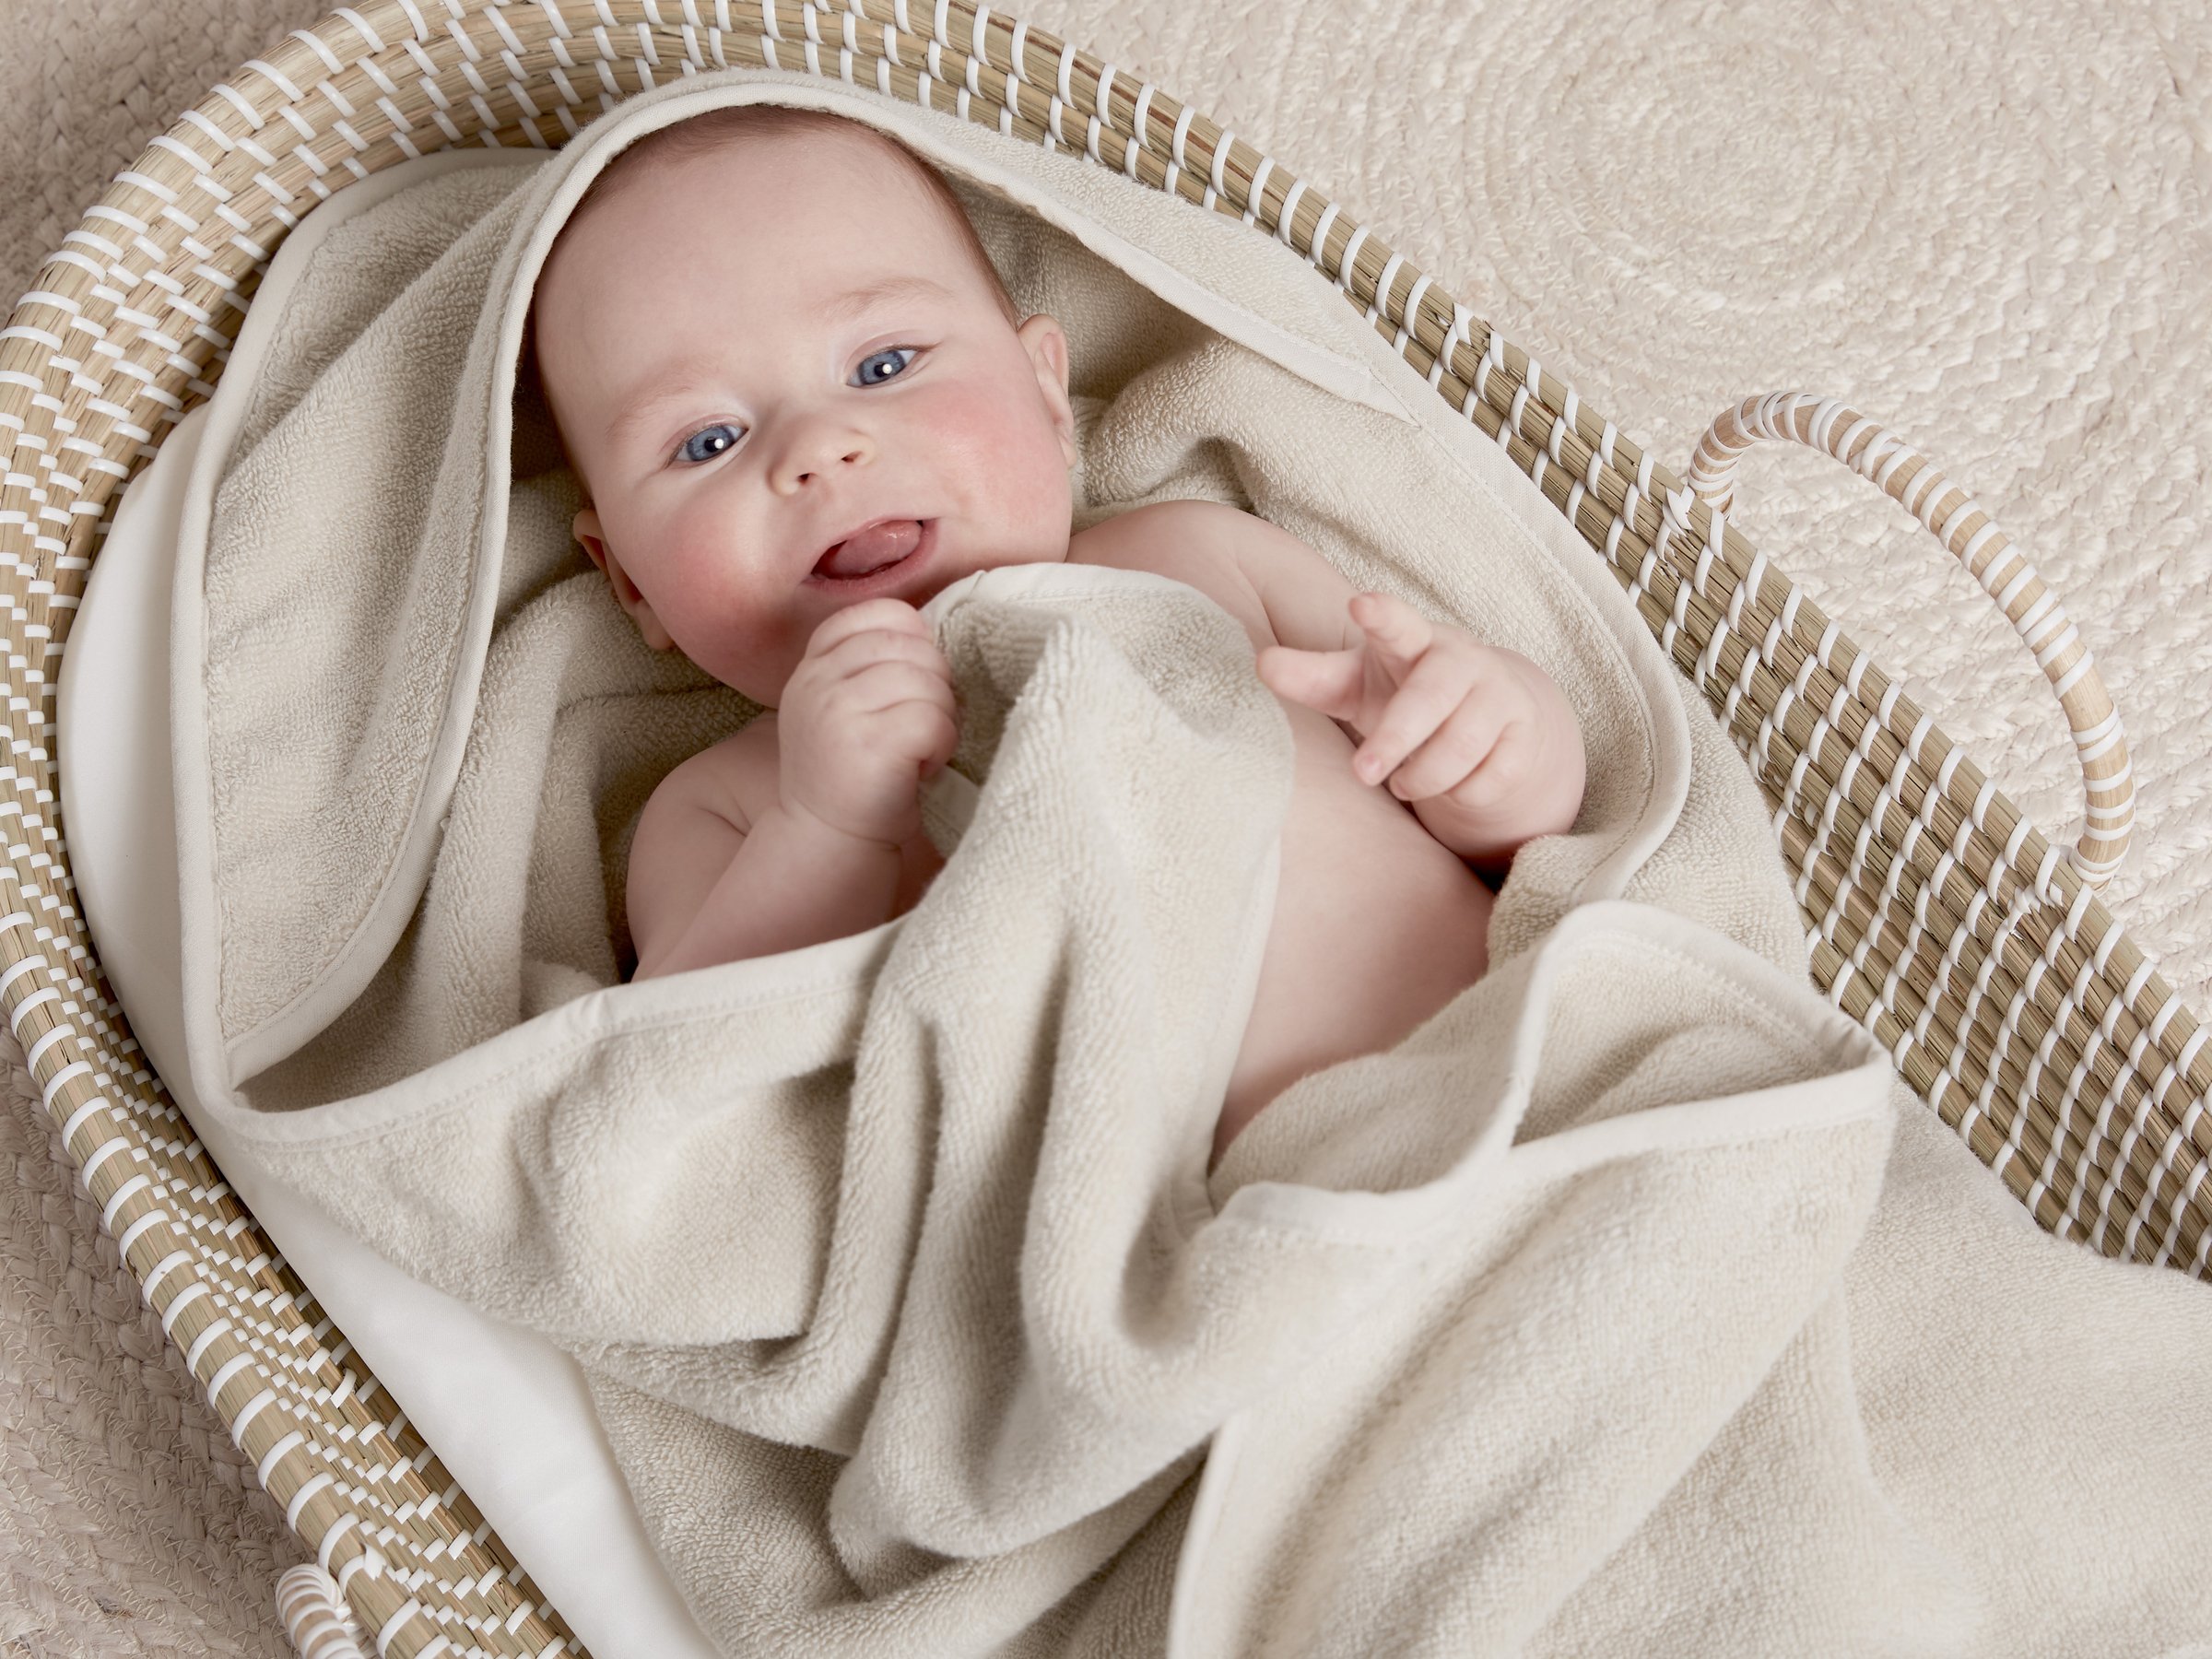 What is a Baby Hooded Towel? Can Babies Use Regular Towels?